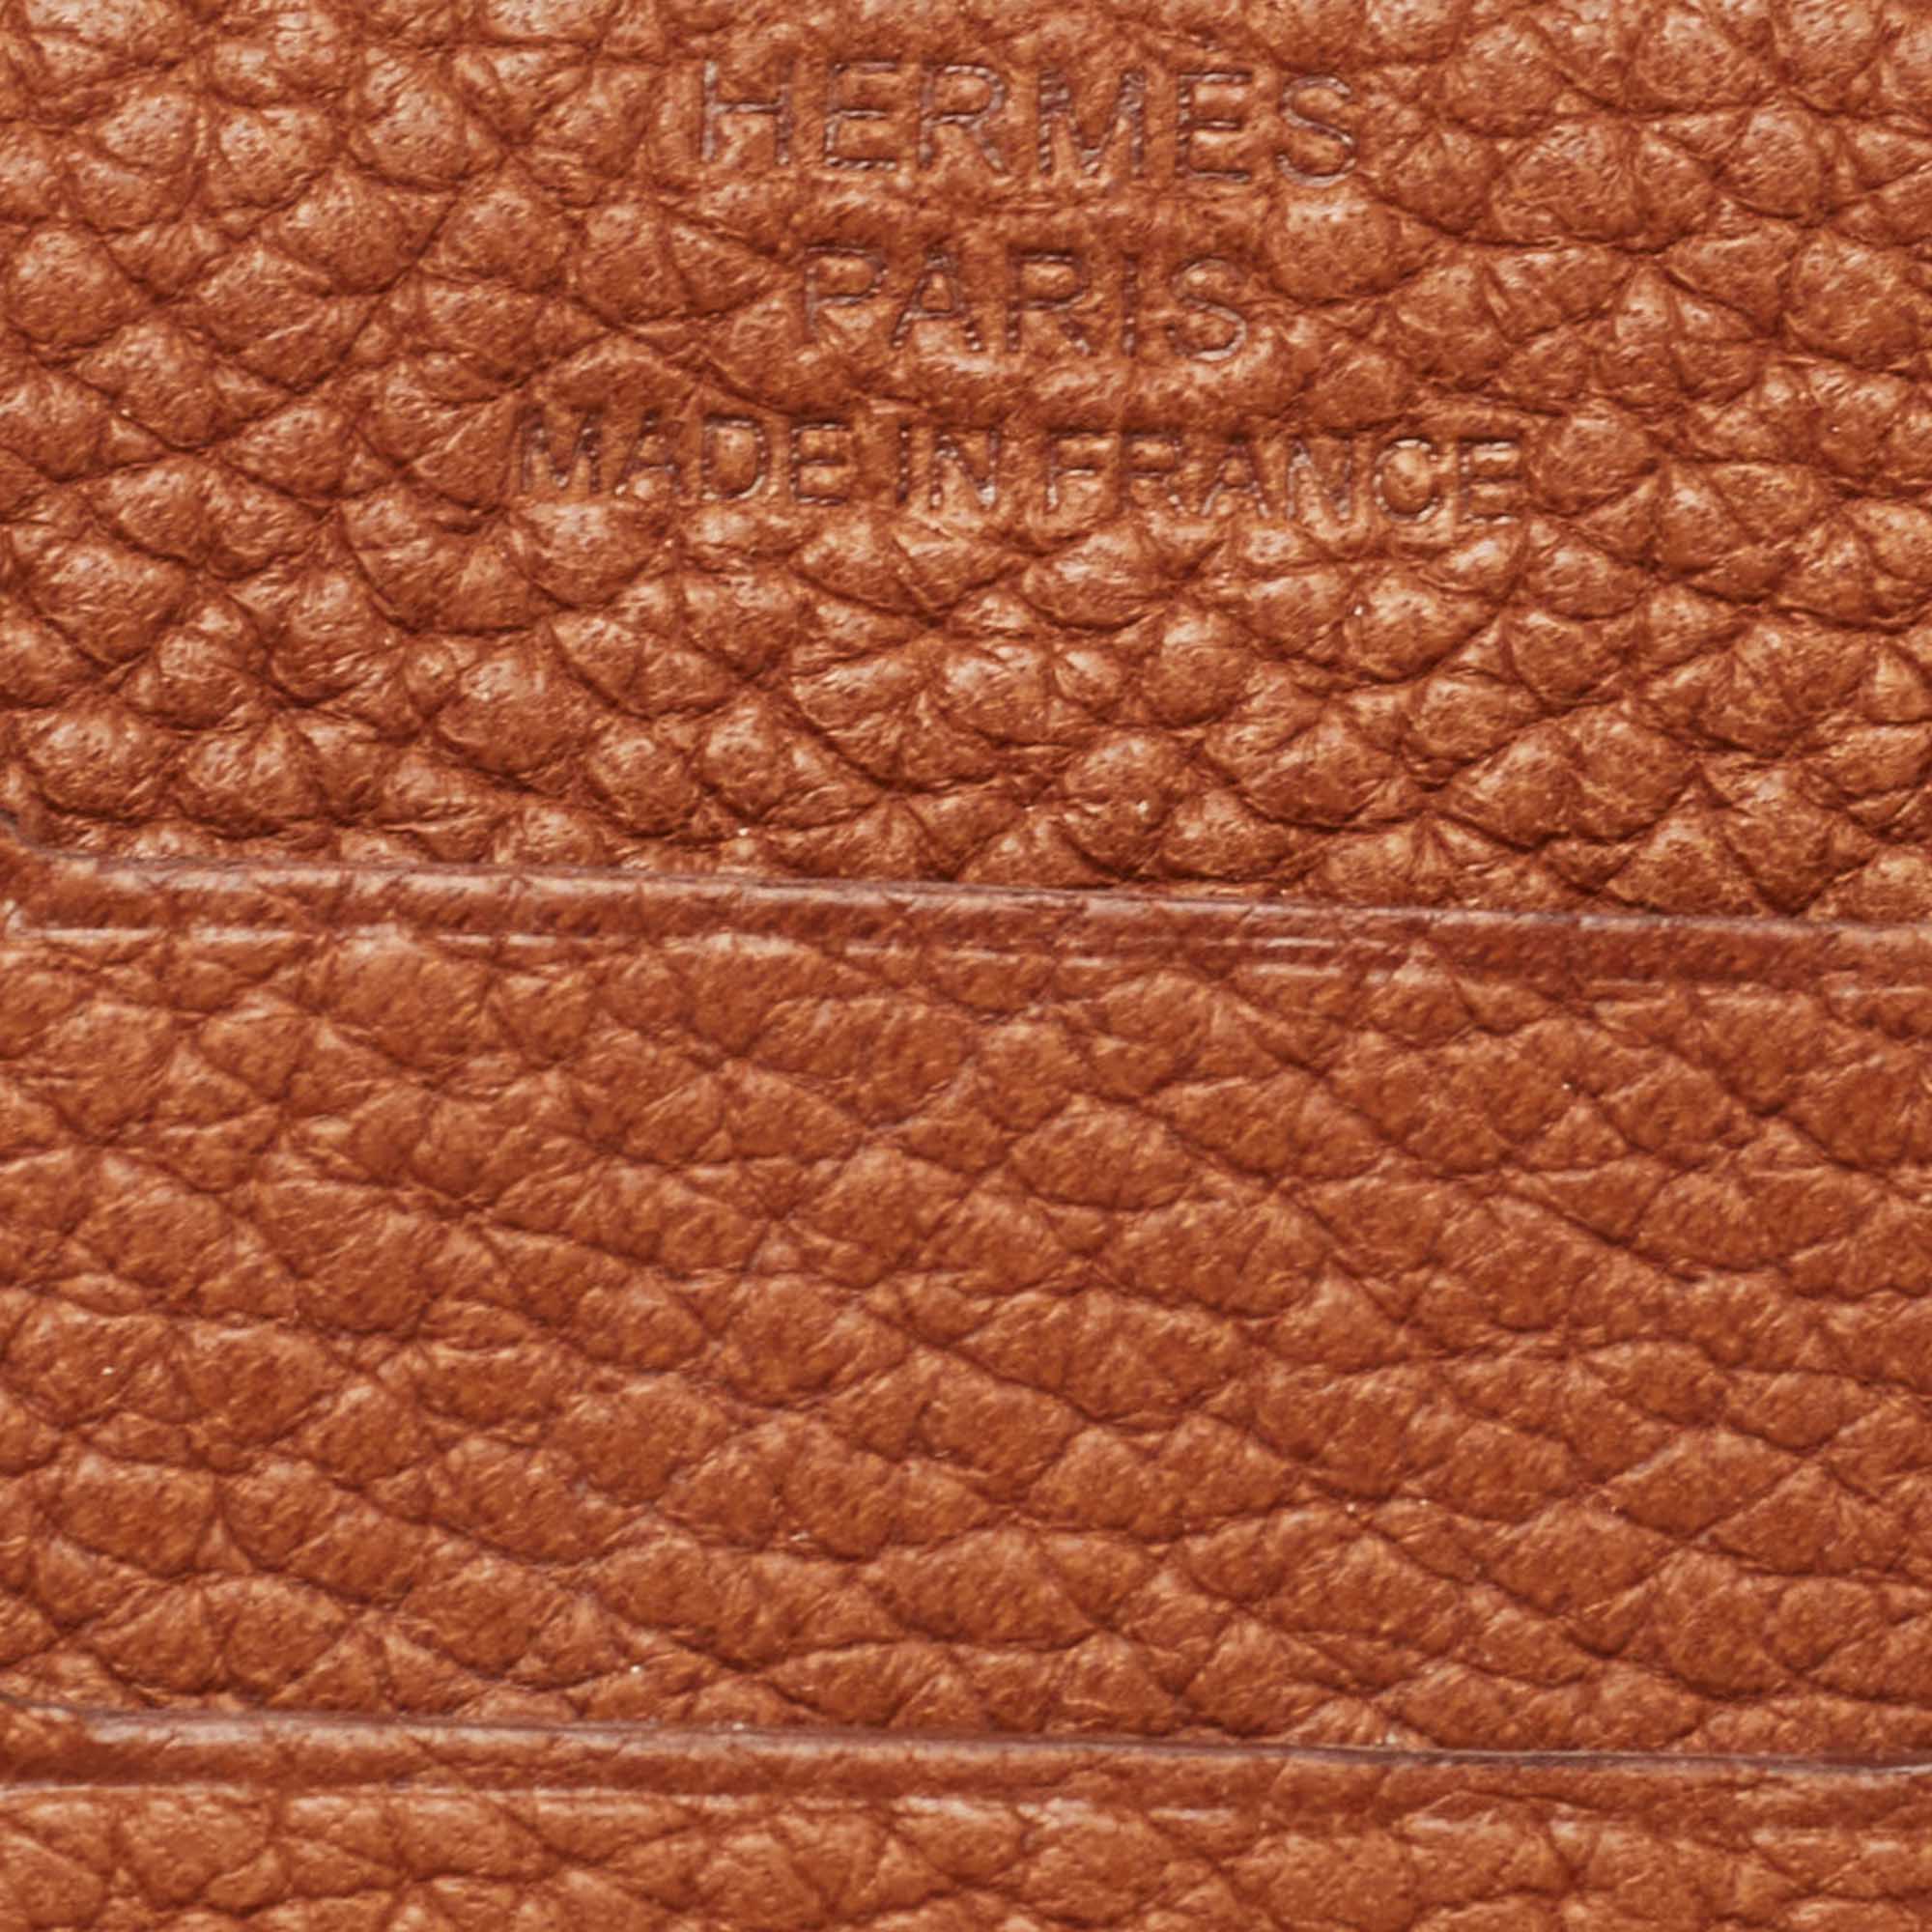 Sold Rare and Brand new Hermès Béarn card holder